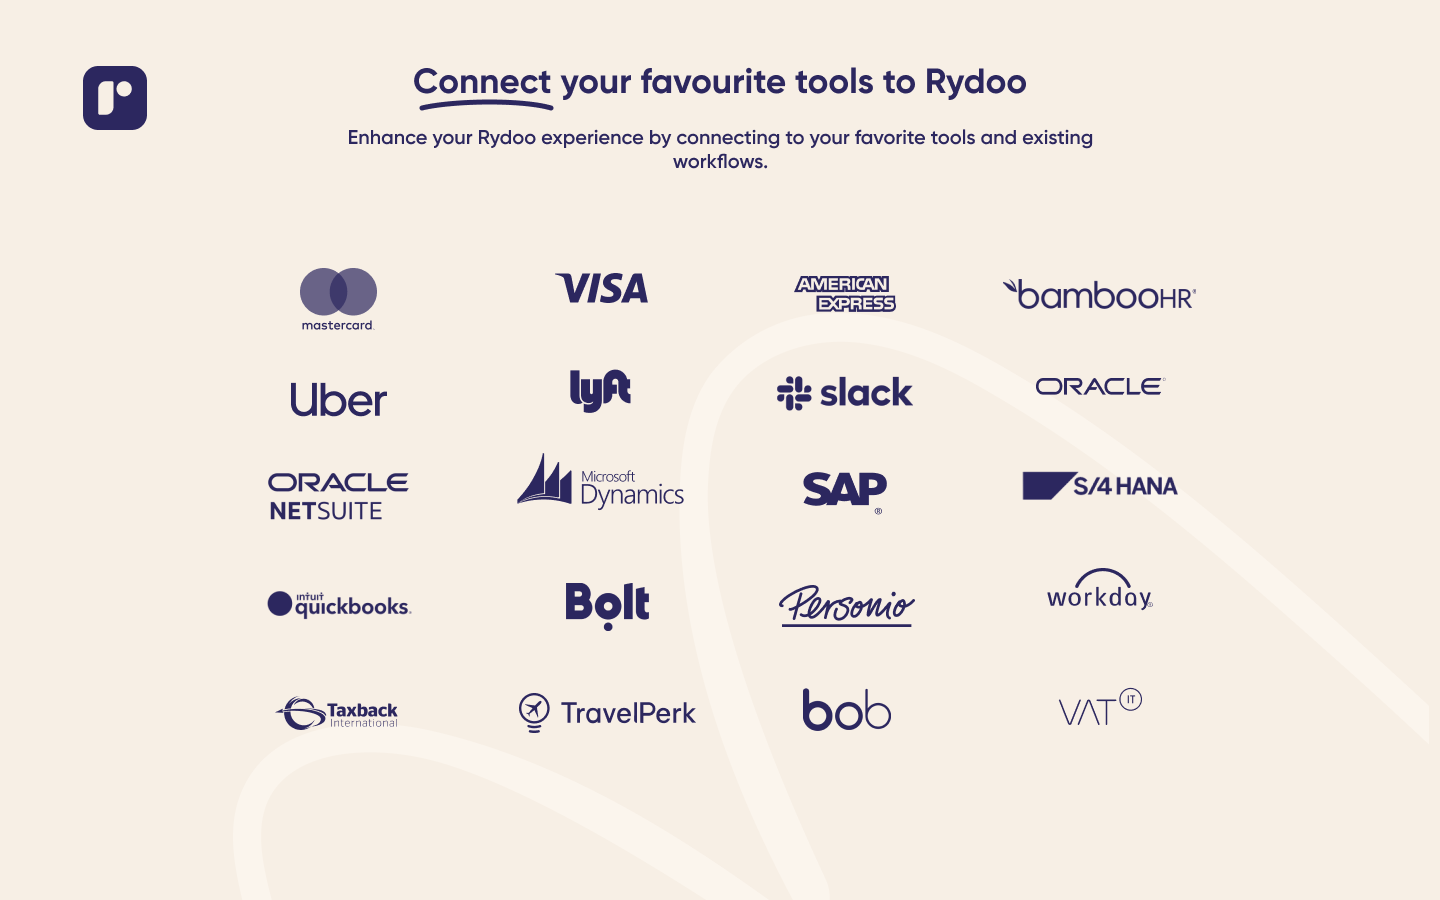 Enhance your Rydoo experience by connecting to your favourite tools and existing workflows.